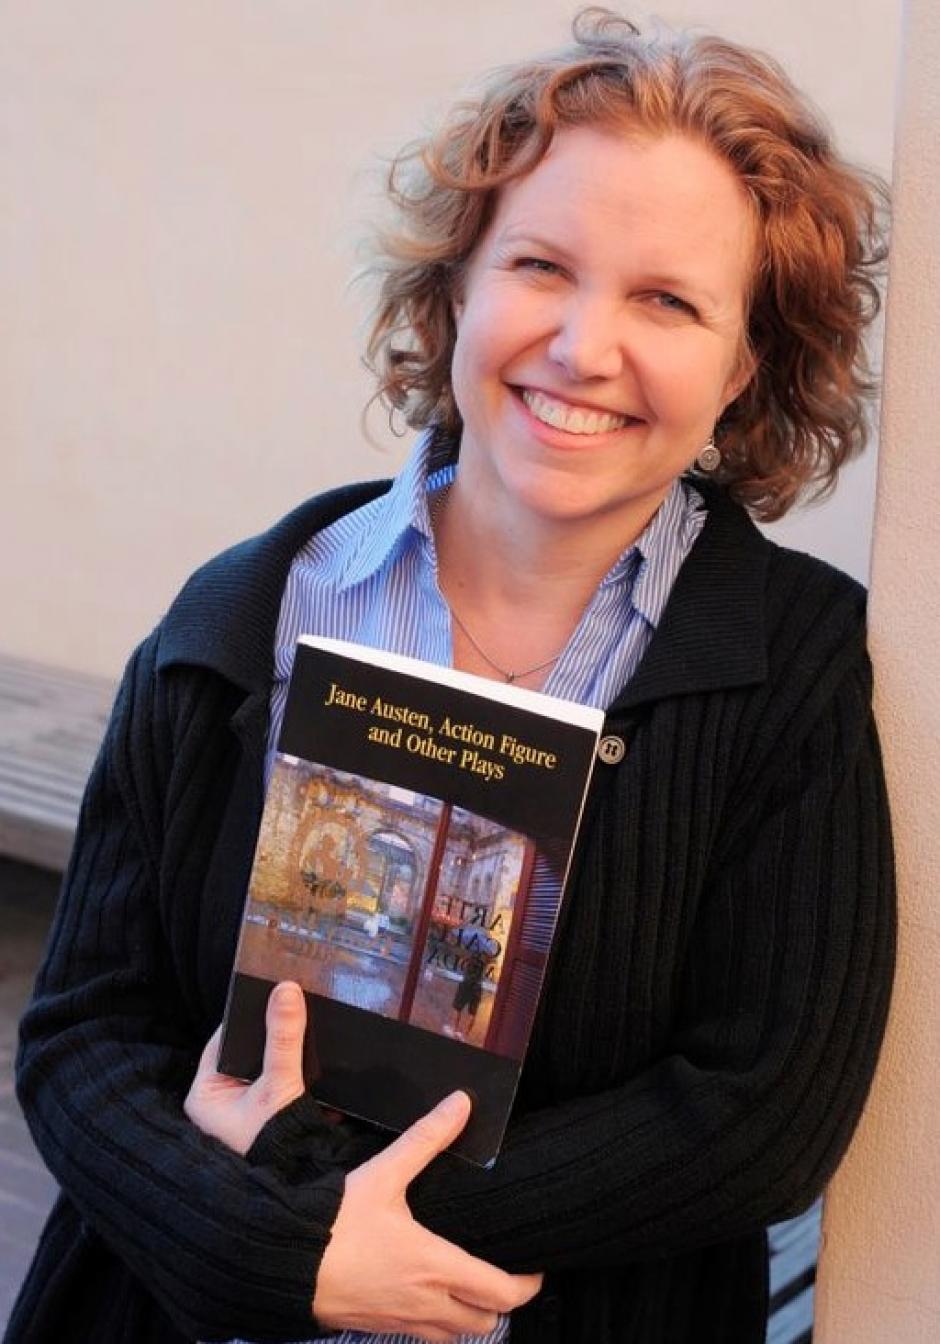 Elaine Avila is holding a book in her arms and smiling at the camera